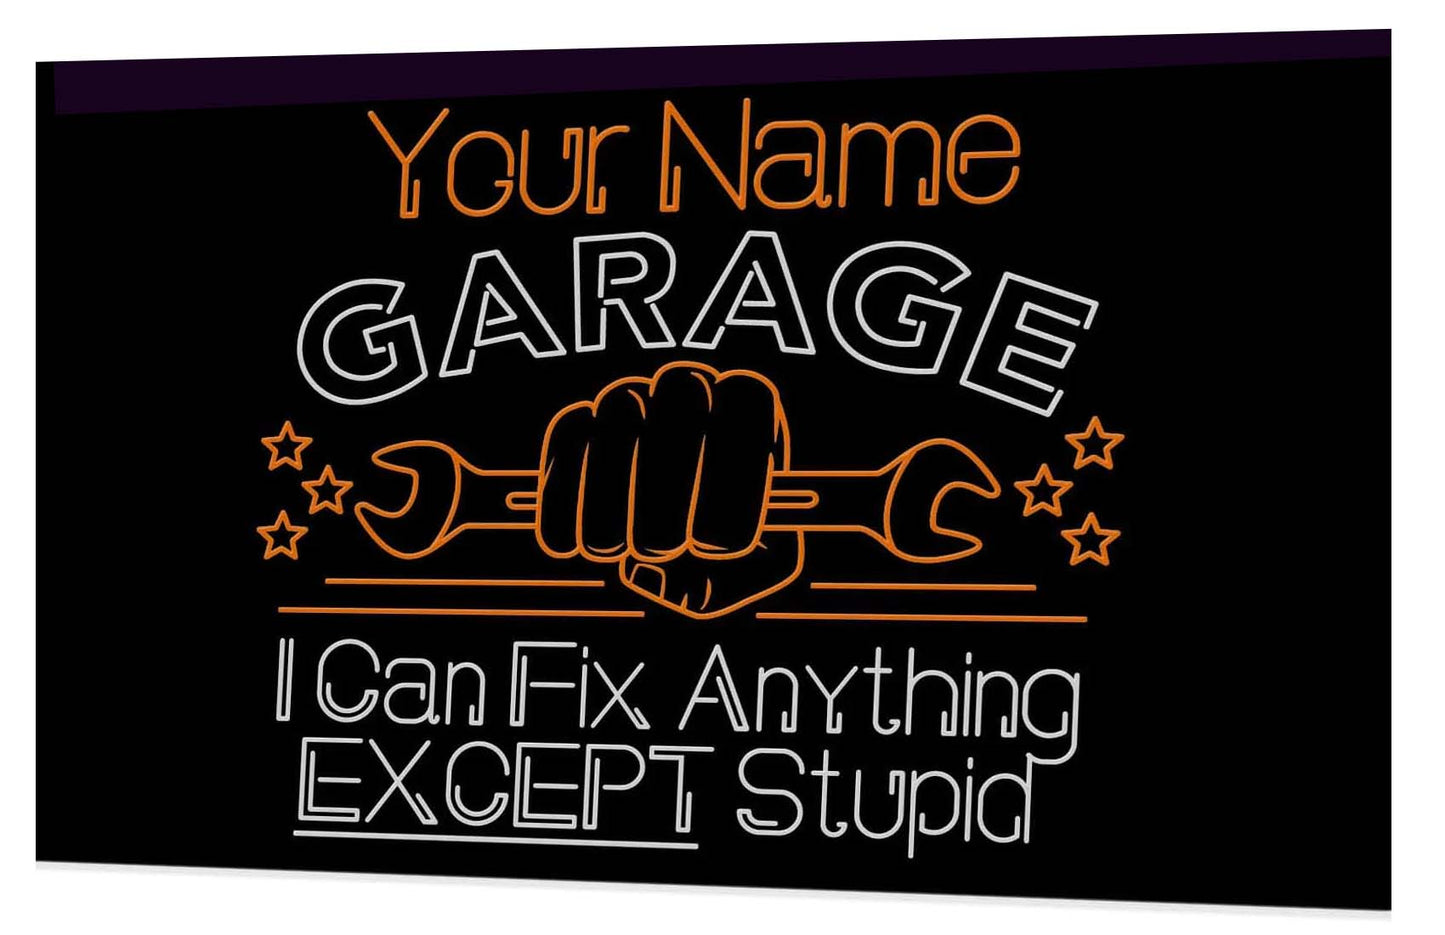  I can fix anything except stupid neon sign - orange white